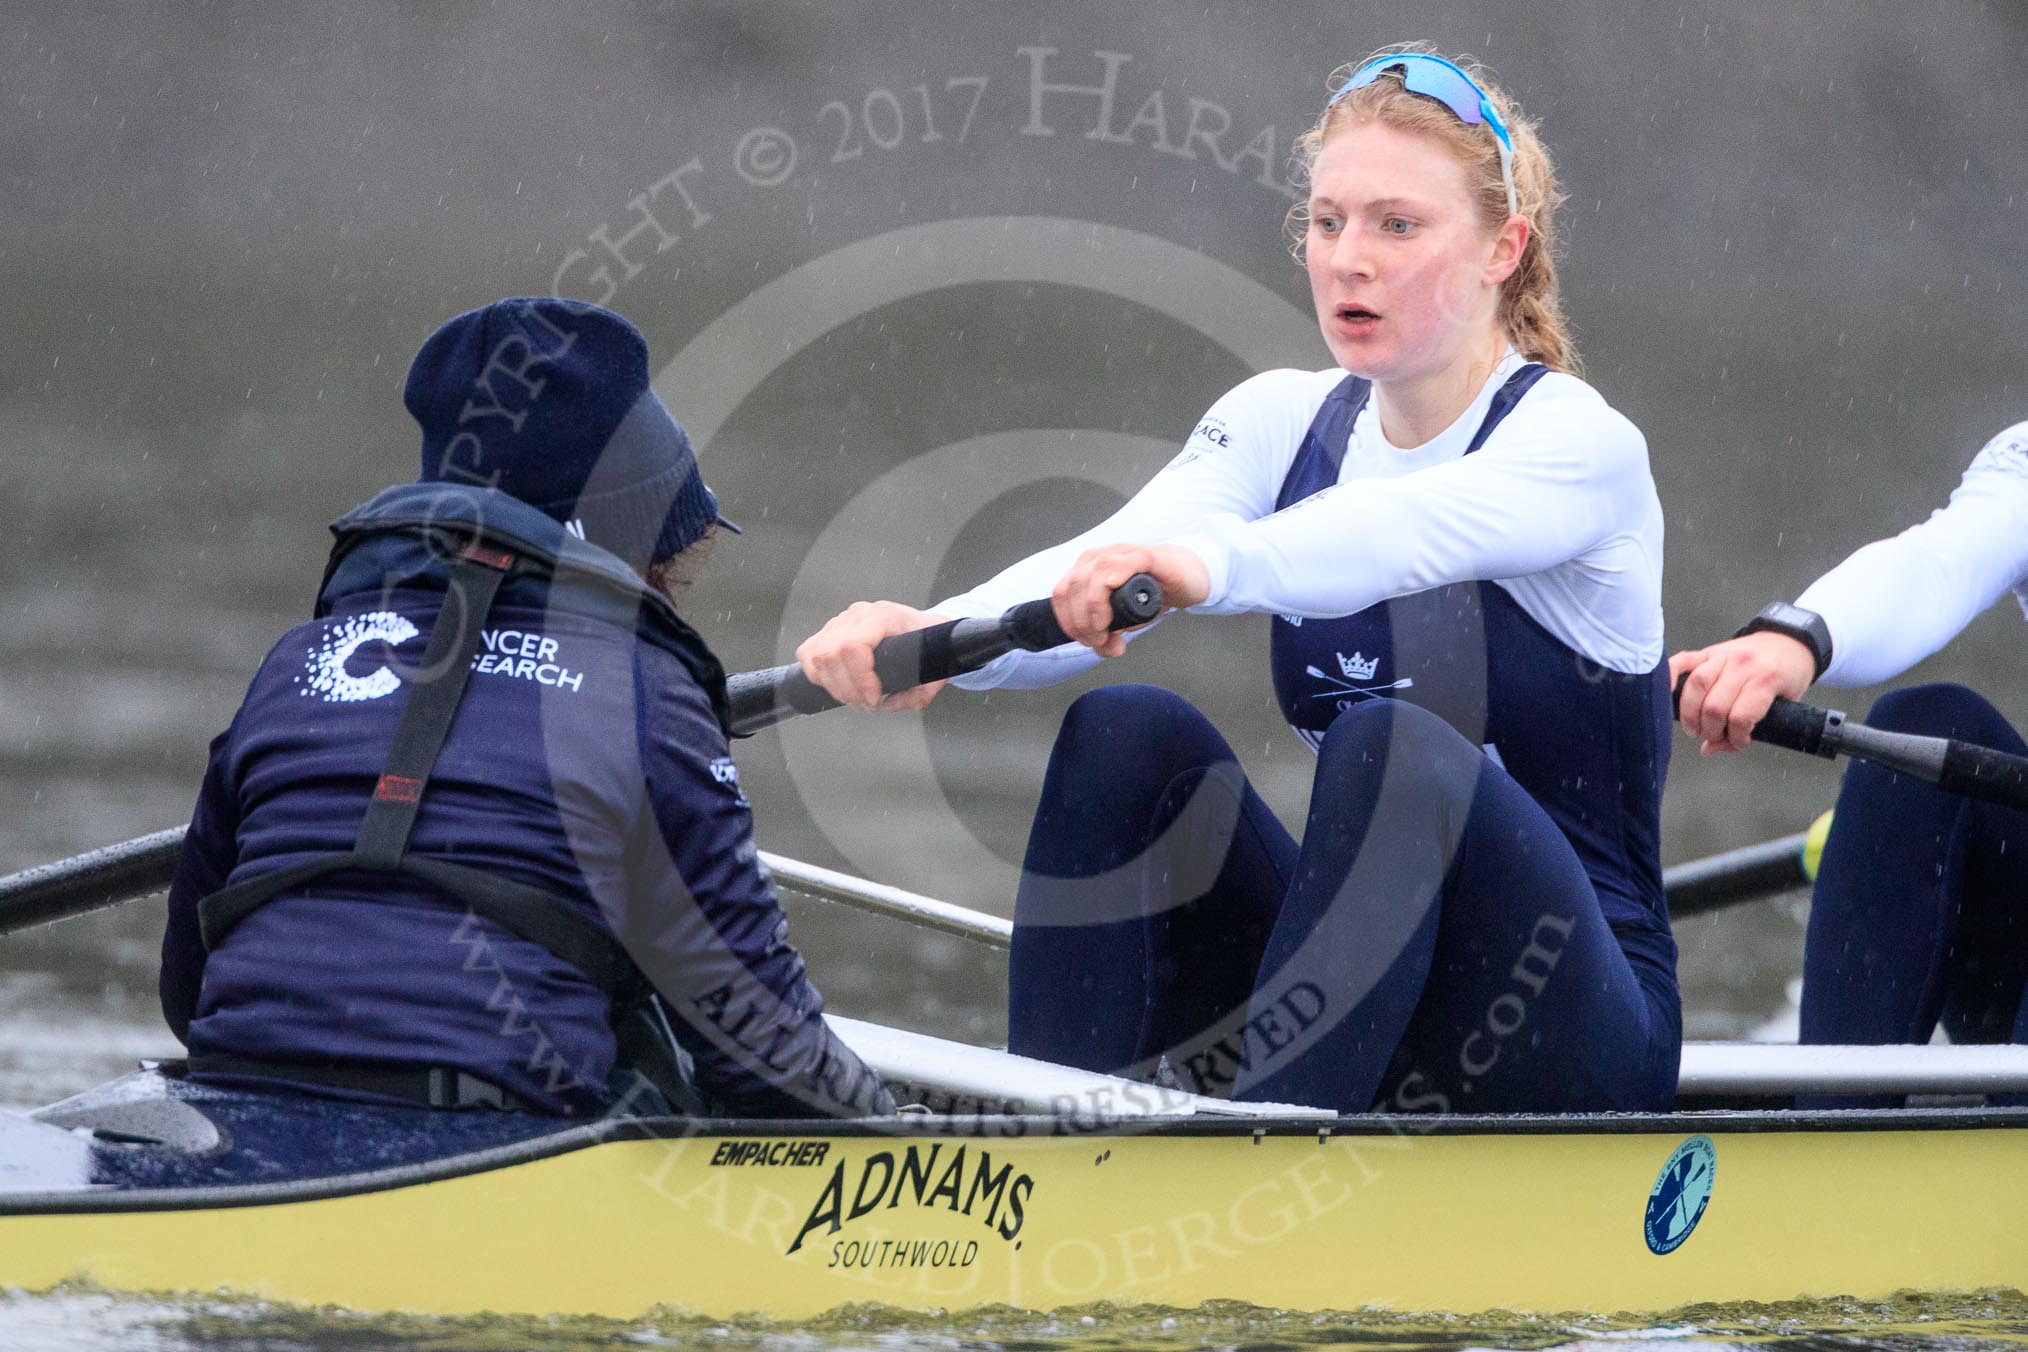 The Boat Race season 2018 - Women's Boat Race Trial Eights (OUWBC, Oxford): "Coursing River" approaching Chiswick Pier - cox Ellie Shearer, stroke Beth Bridgman.
River Thames between Putney Bridge and Mortlake,
London SW15,

United Kingdom,
on 21 January 2018 at 14:39, image #141